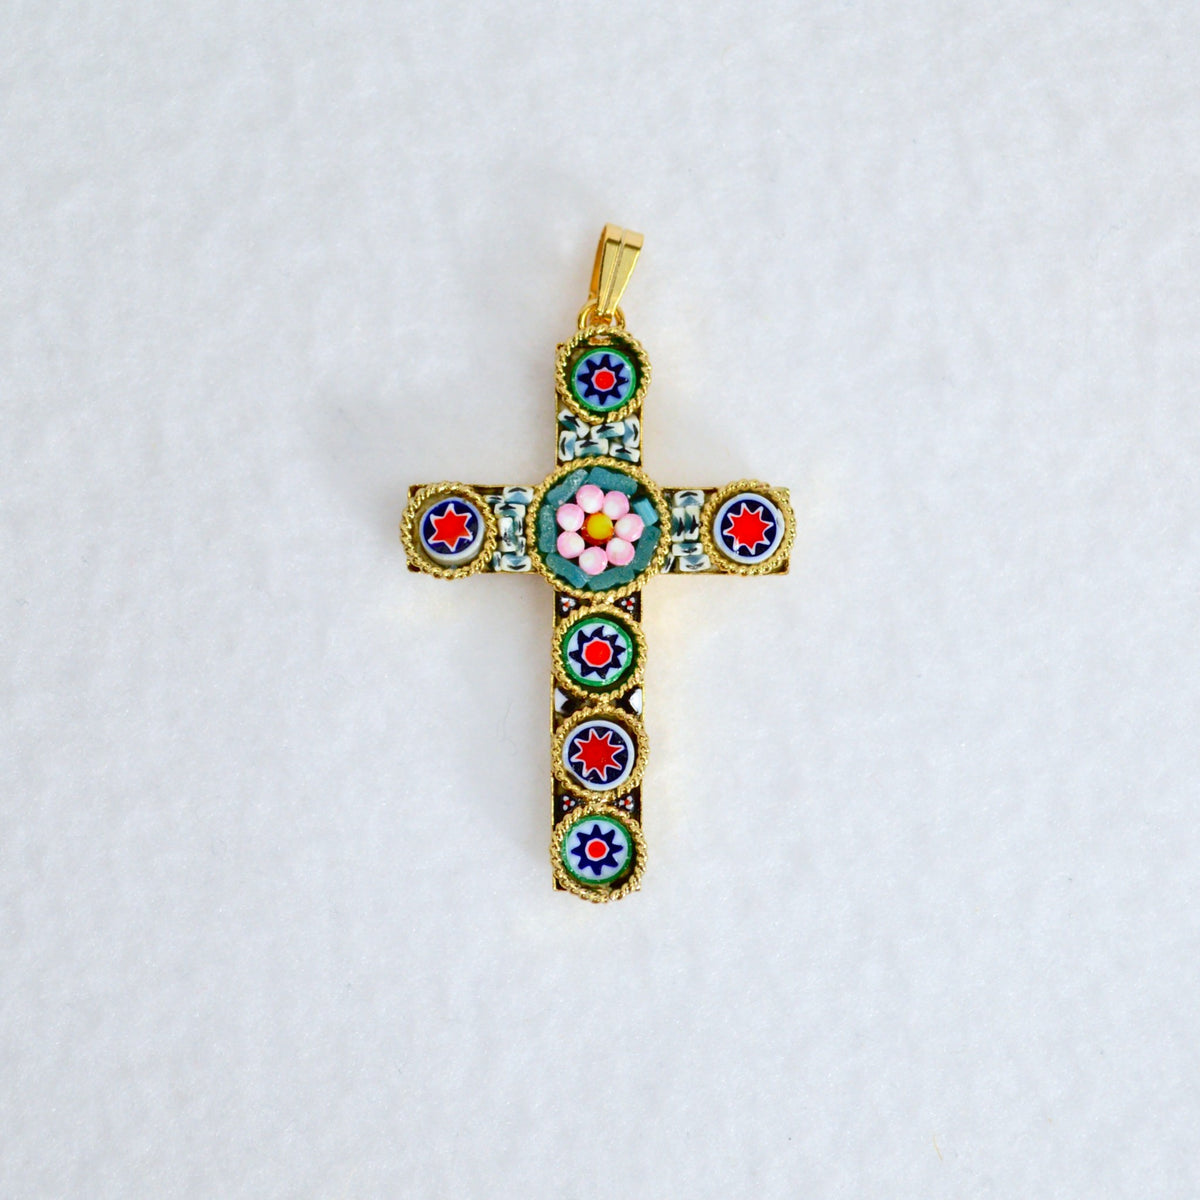 Florentine Mosaic Cross Pendant Necklace, Small, Made In Italy - My Italian Decor